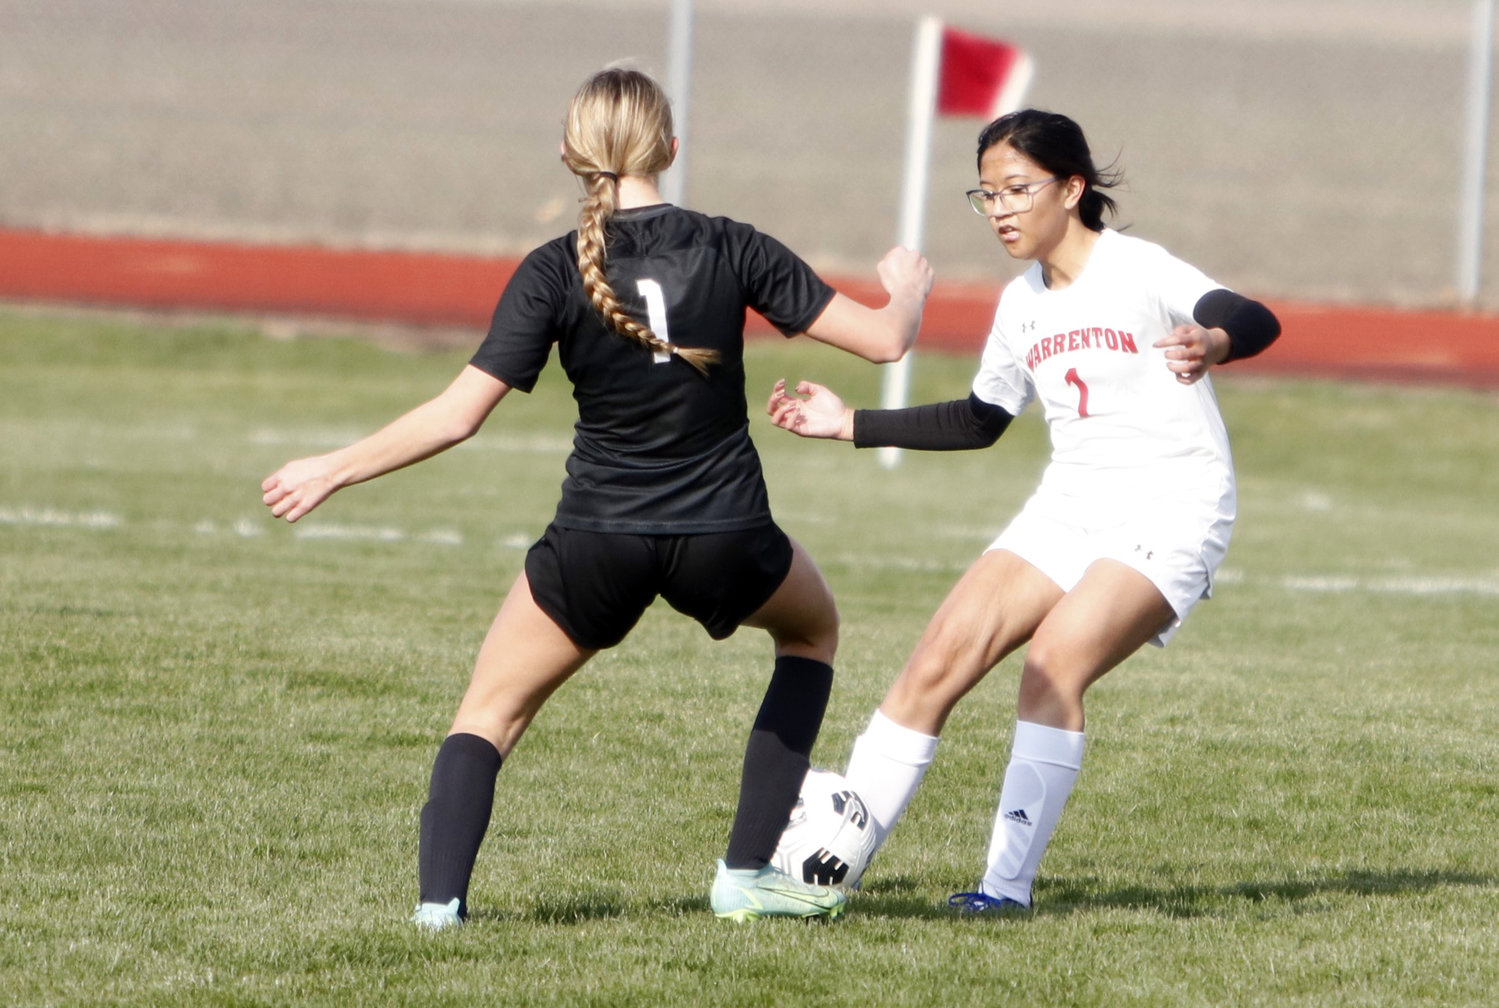 Warrenton senior Princess Cullom kicks the ball as she is challenged by an Orchard Farm defender during Tuesday's game.